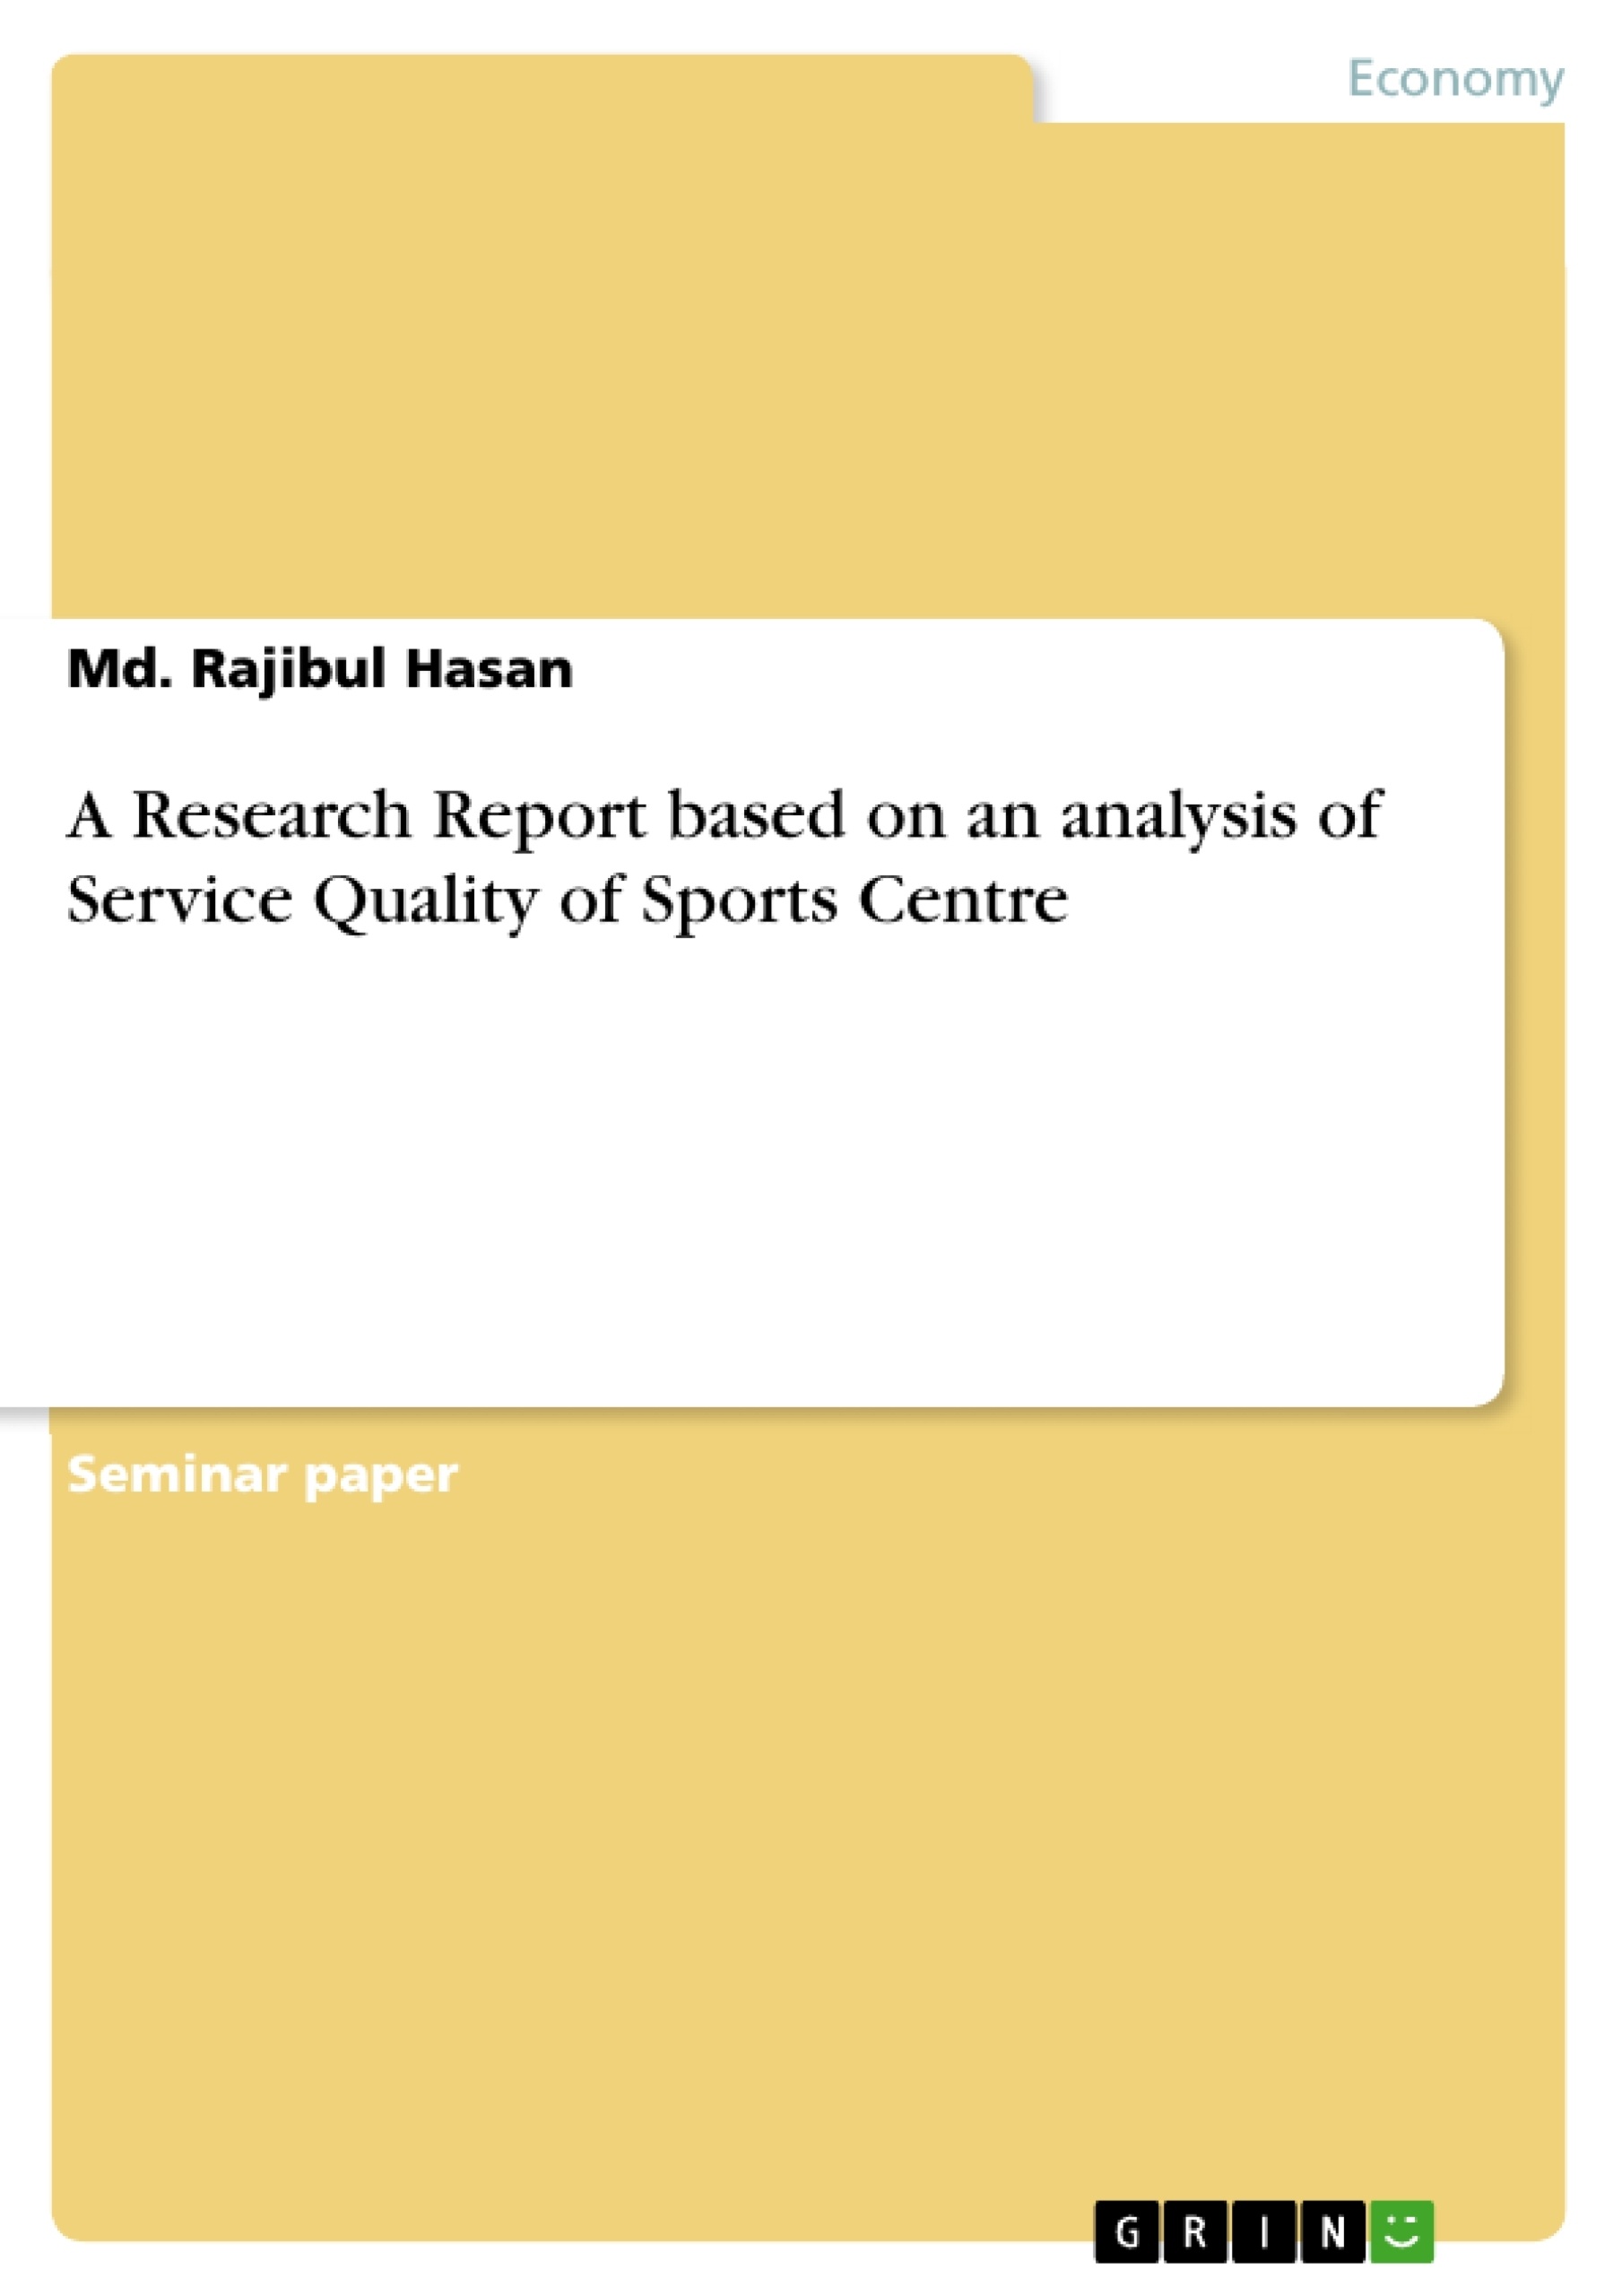 thesis title about sports